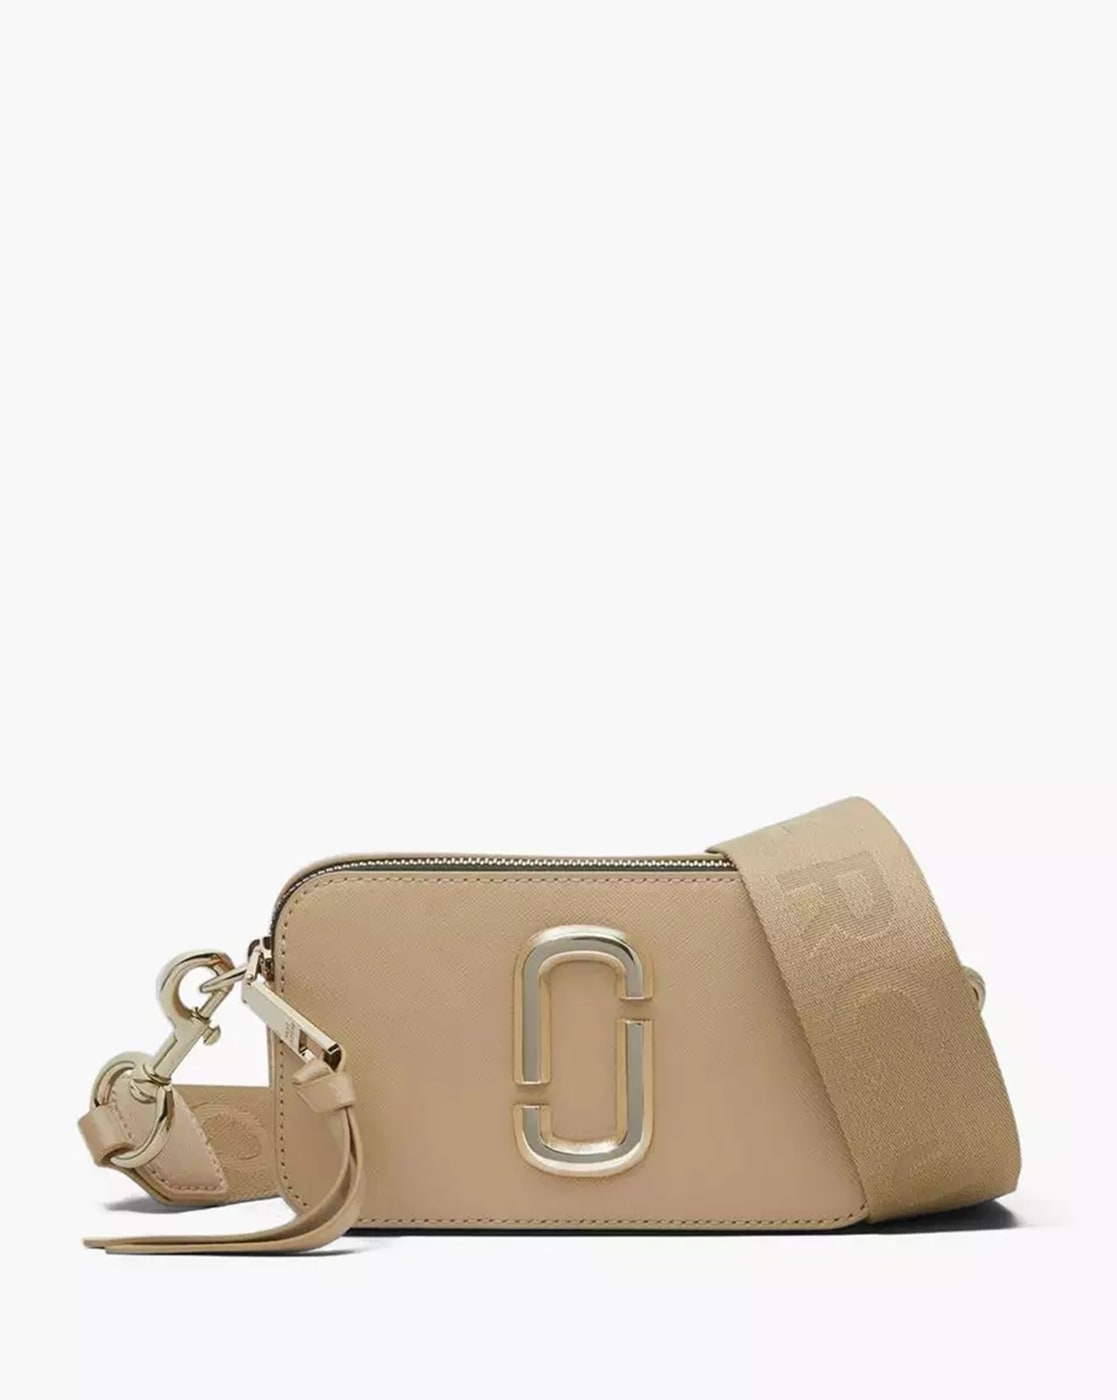 We Need Every Color of This Marc Jacobs Leather Crossbody | Us Weekly